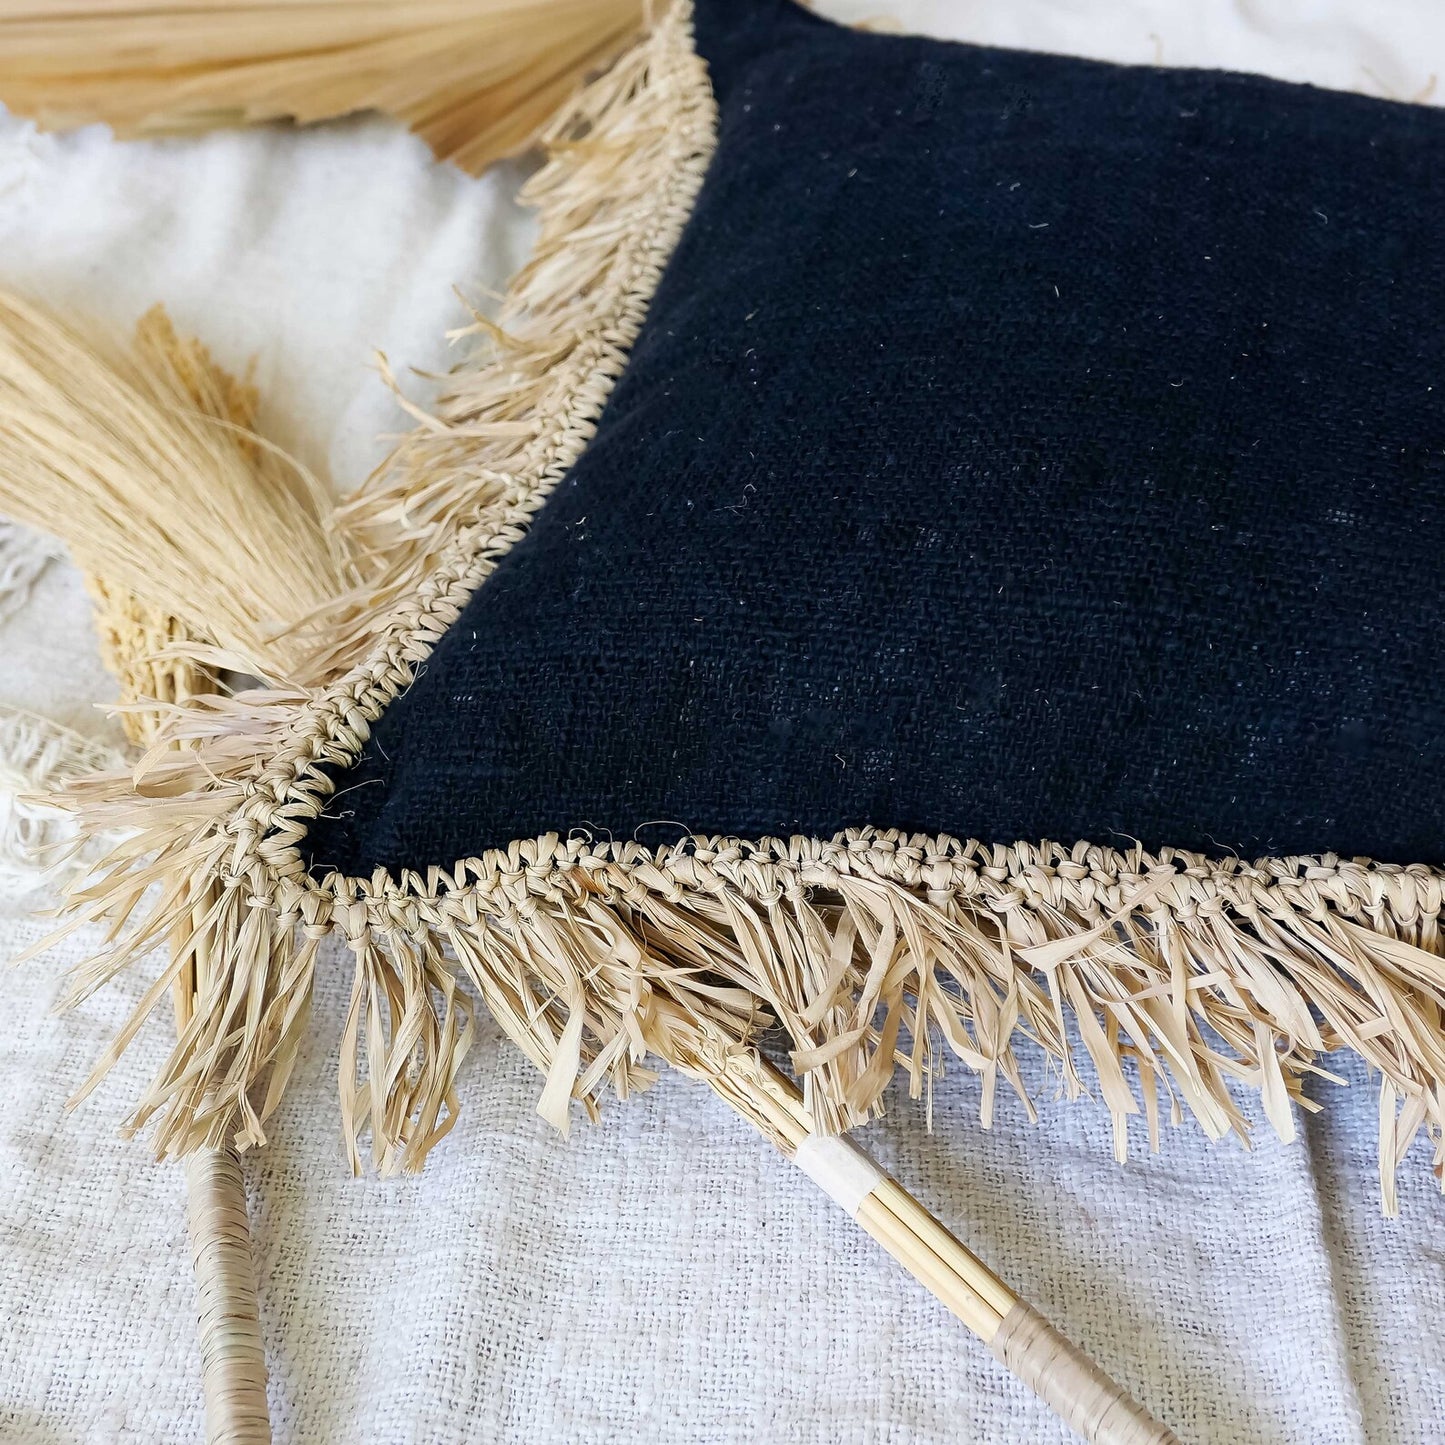 Black organic cotton fringed pillow cover